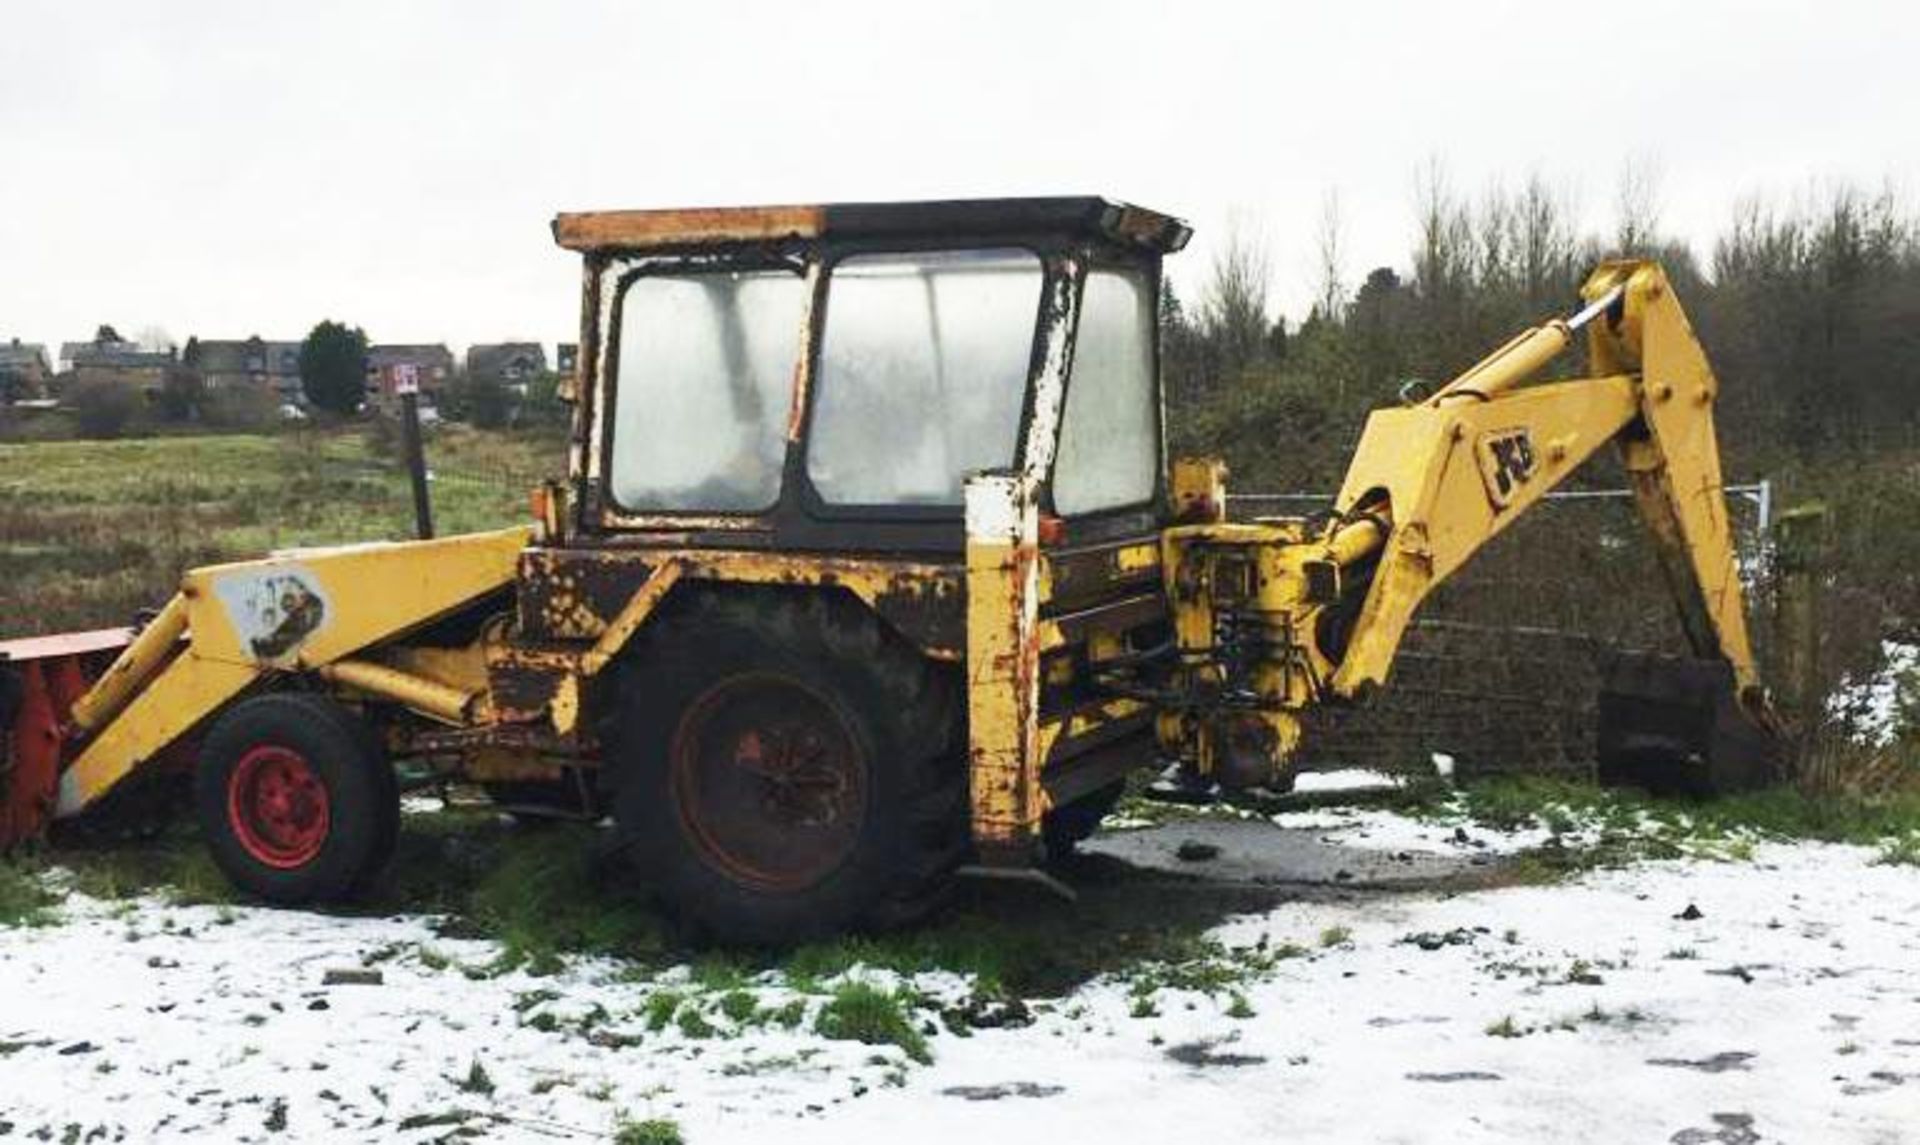 JCB 3C GOOD RUNNER. LEYLAND ENGINE, ONE OF THE LAST MADE 3 GEAR LEVERS, MOSTLY USED WITH FRONT